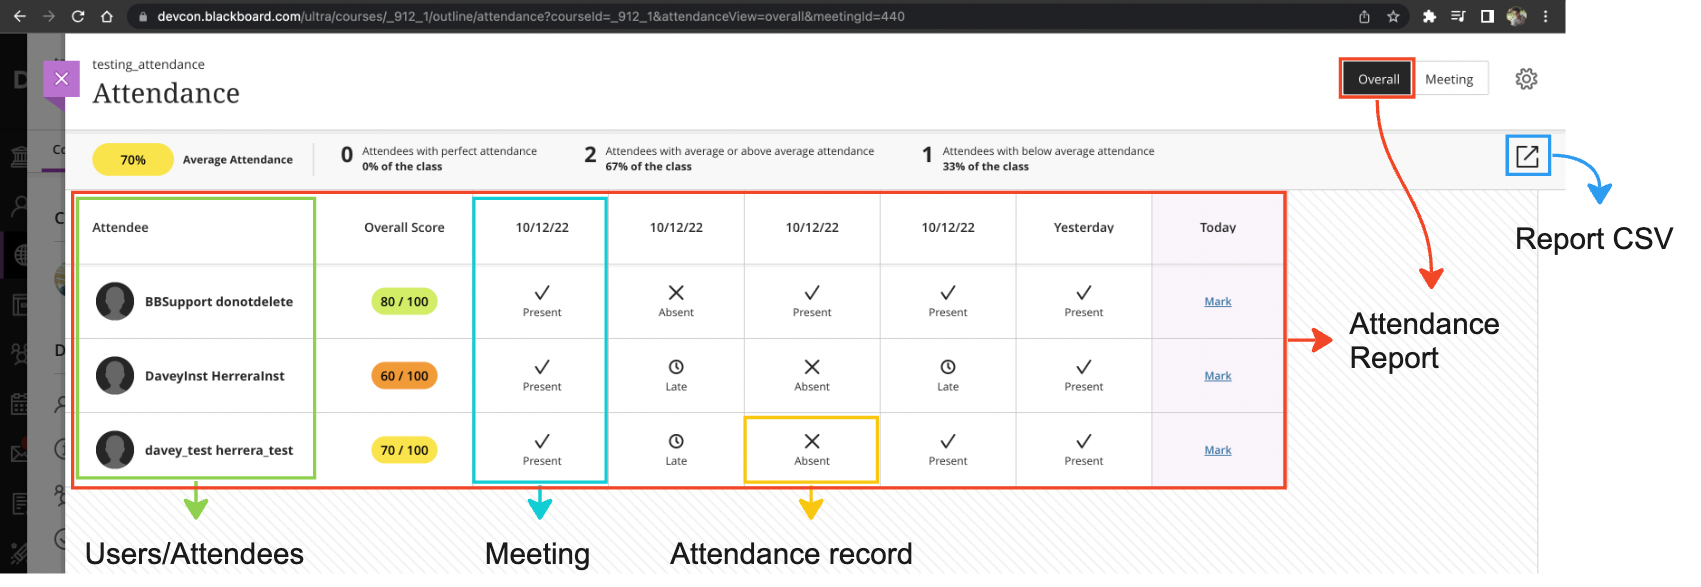 Image showing the parts of attendance